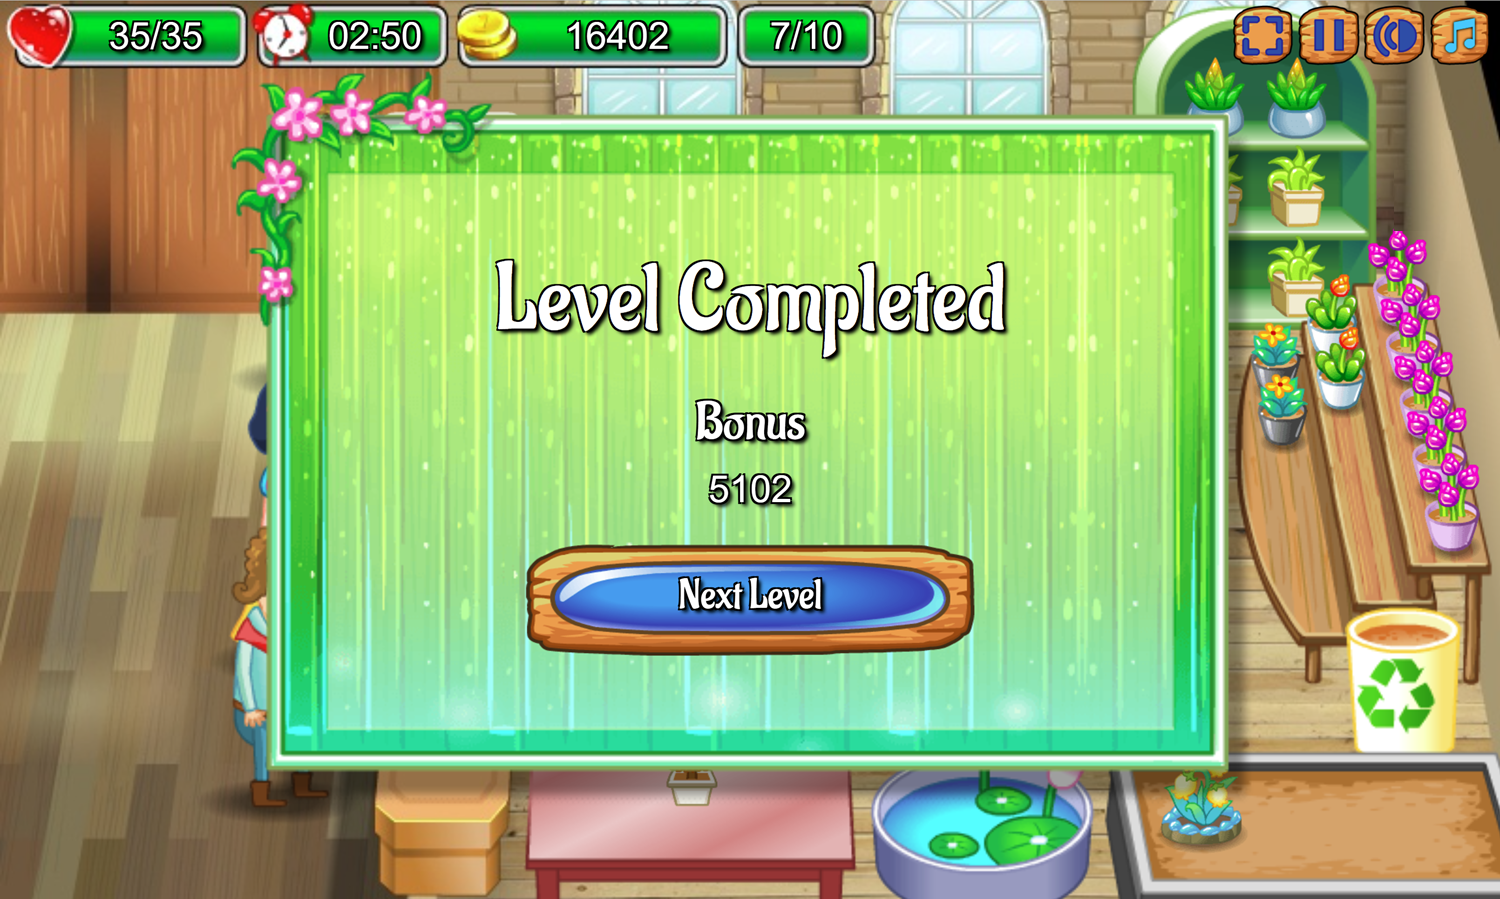 Flower Shop Game Level Completed Screen Screenshot.